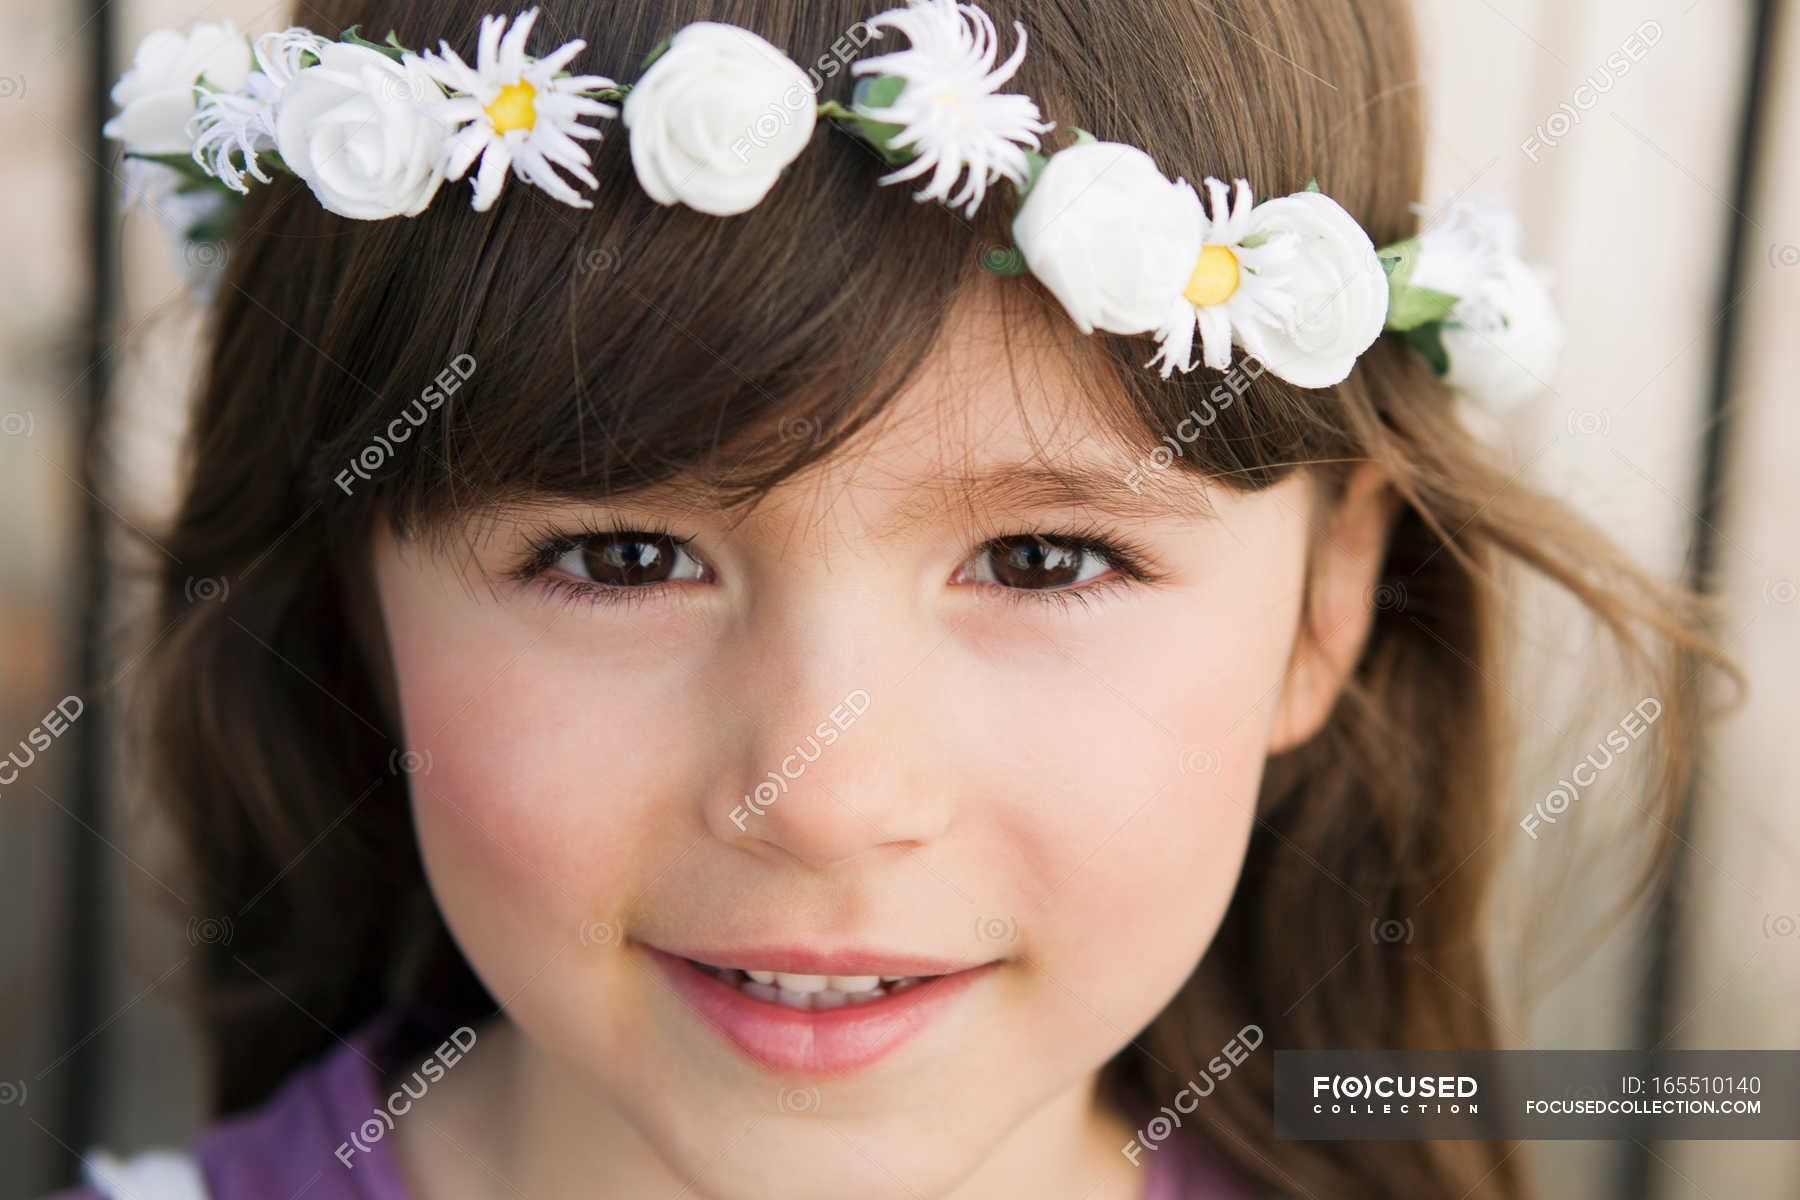 Close up of girl wearing flower crown — only female, Eye contact - Stock  Photo | #165510140